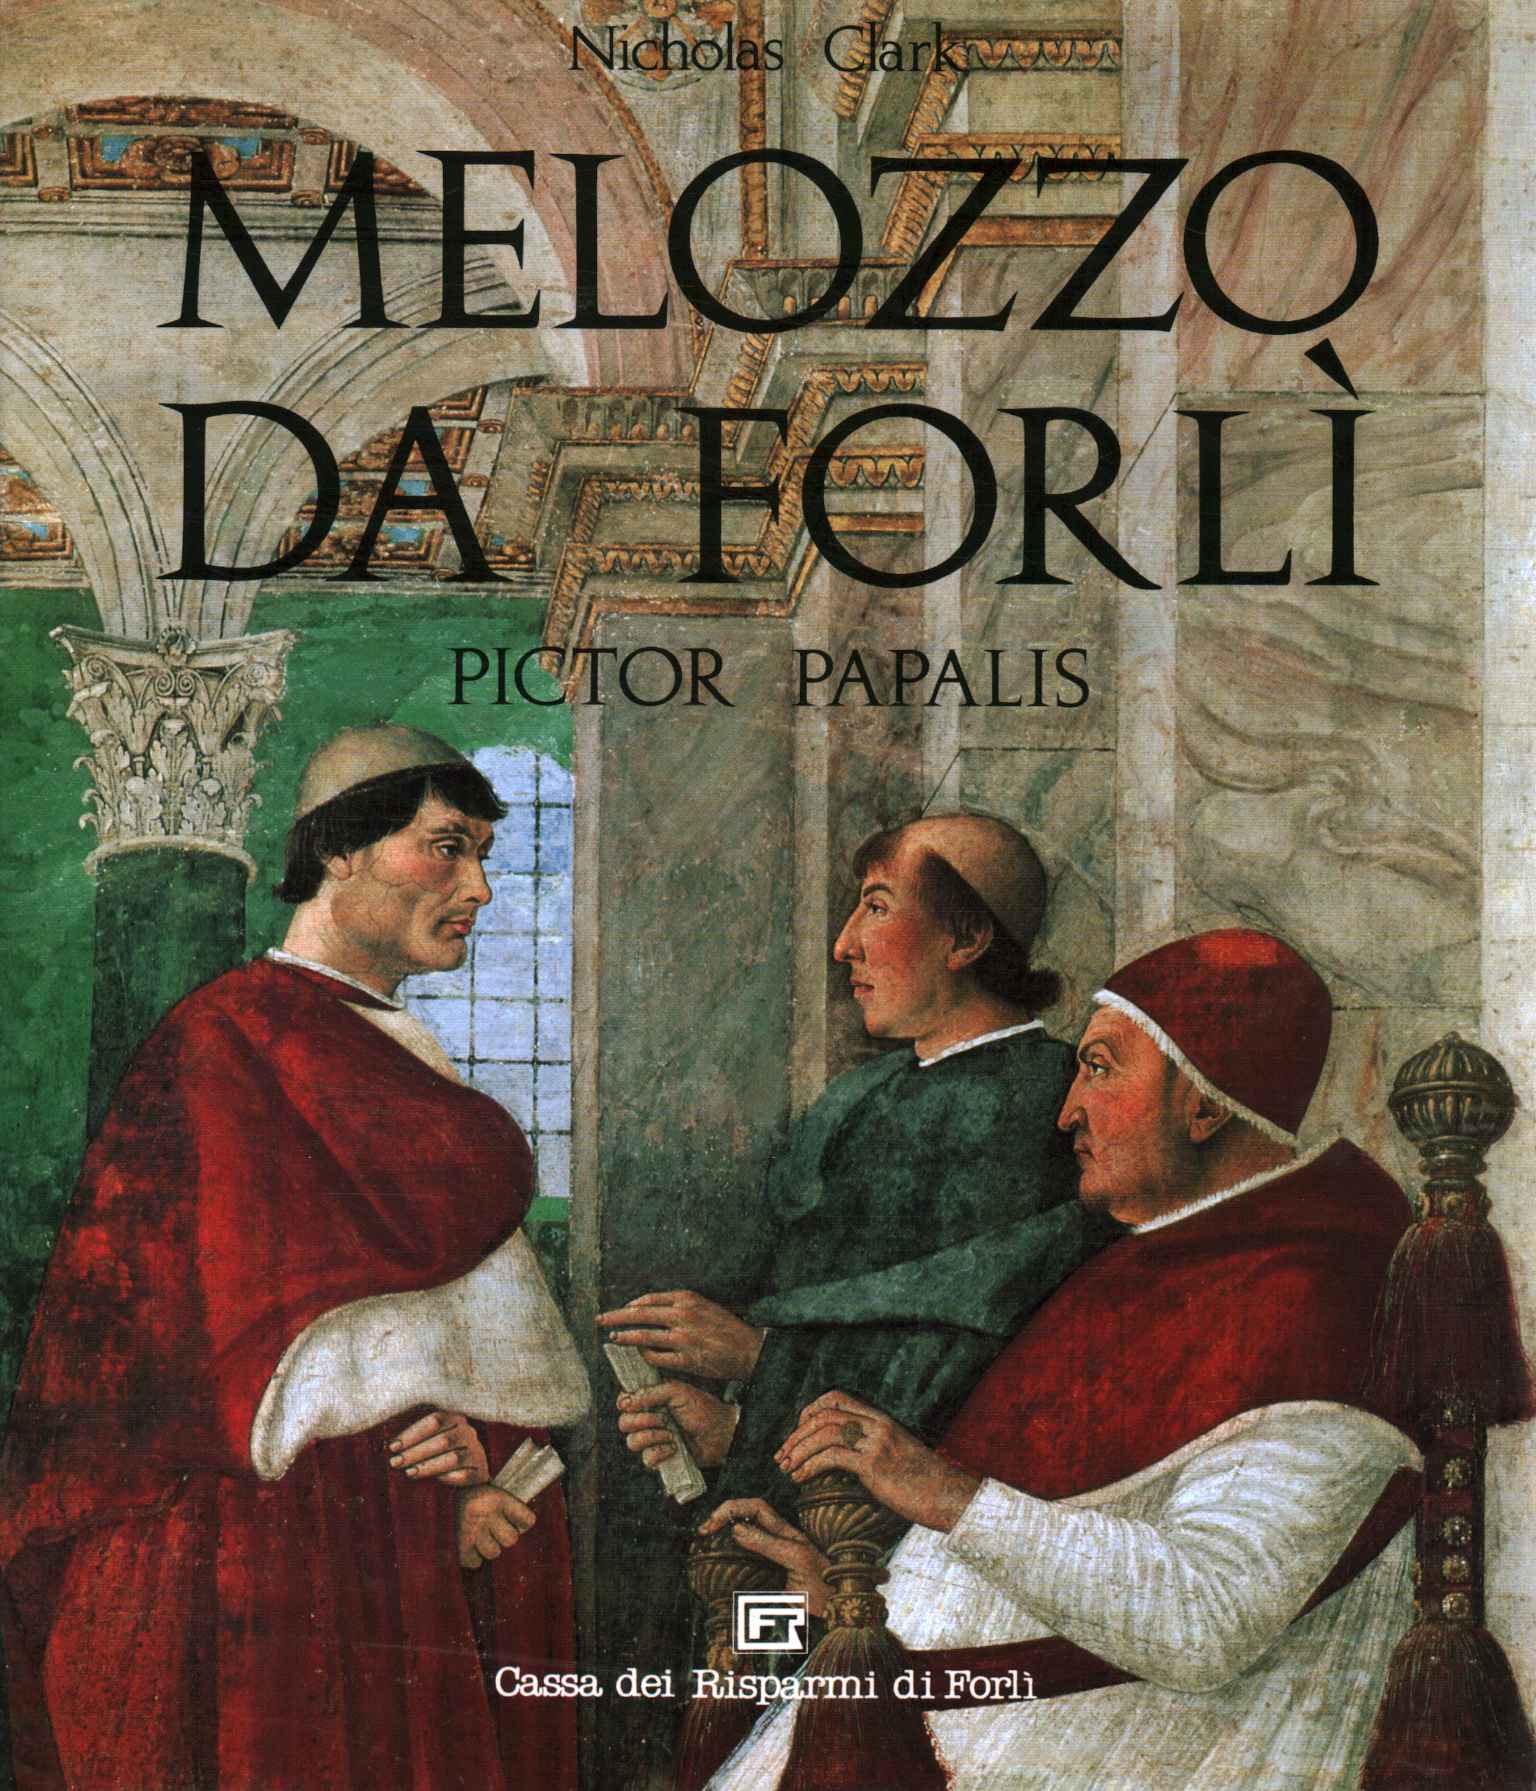 Melozzo from Forlì